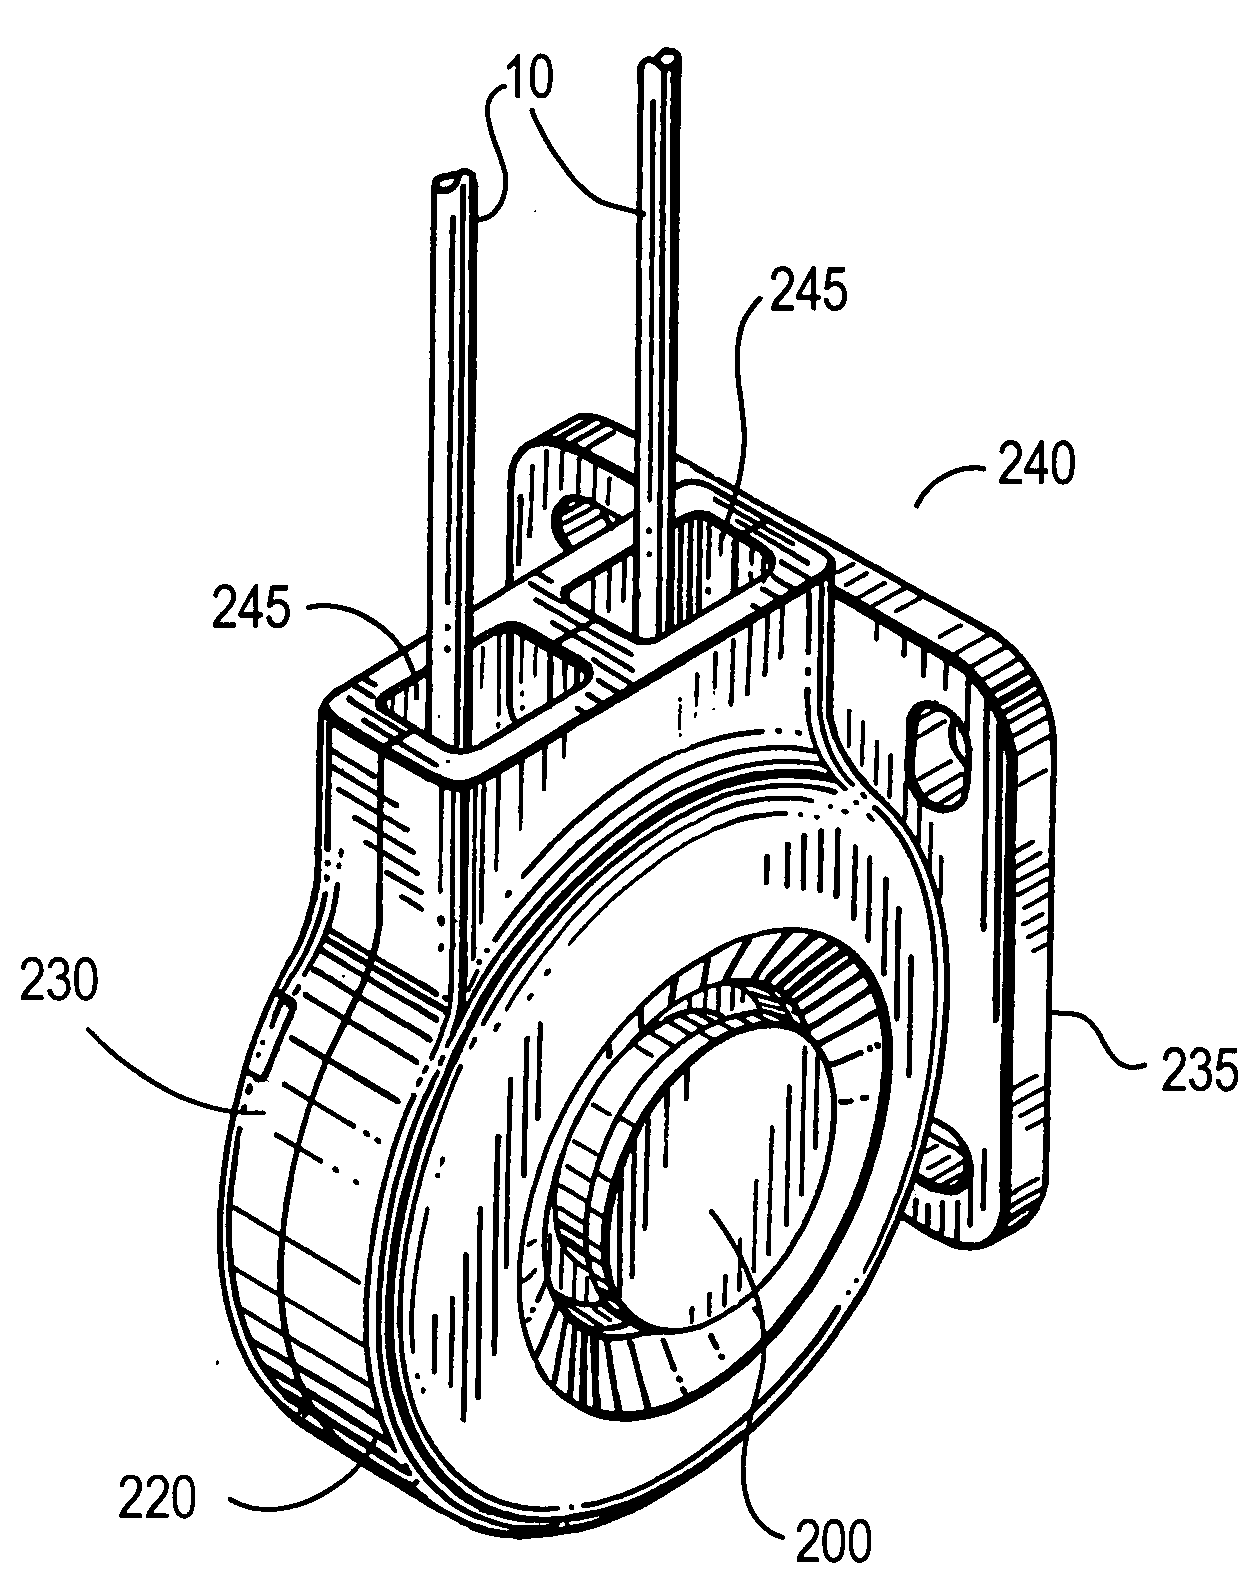 Active tension device for a window covering